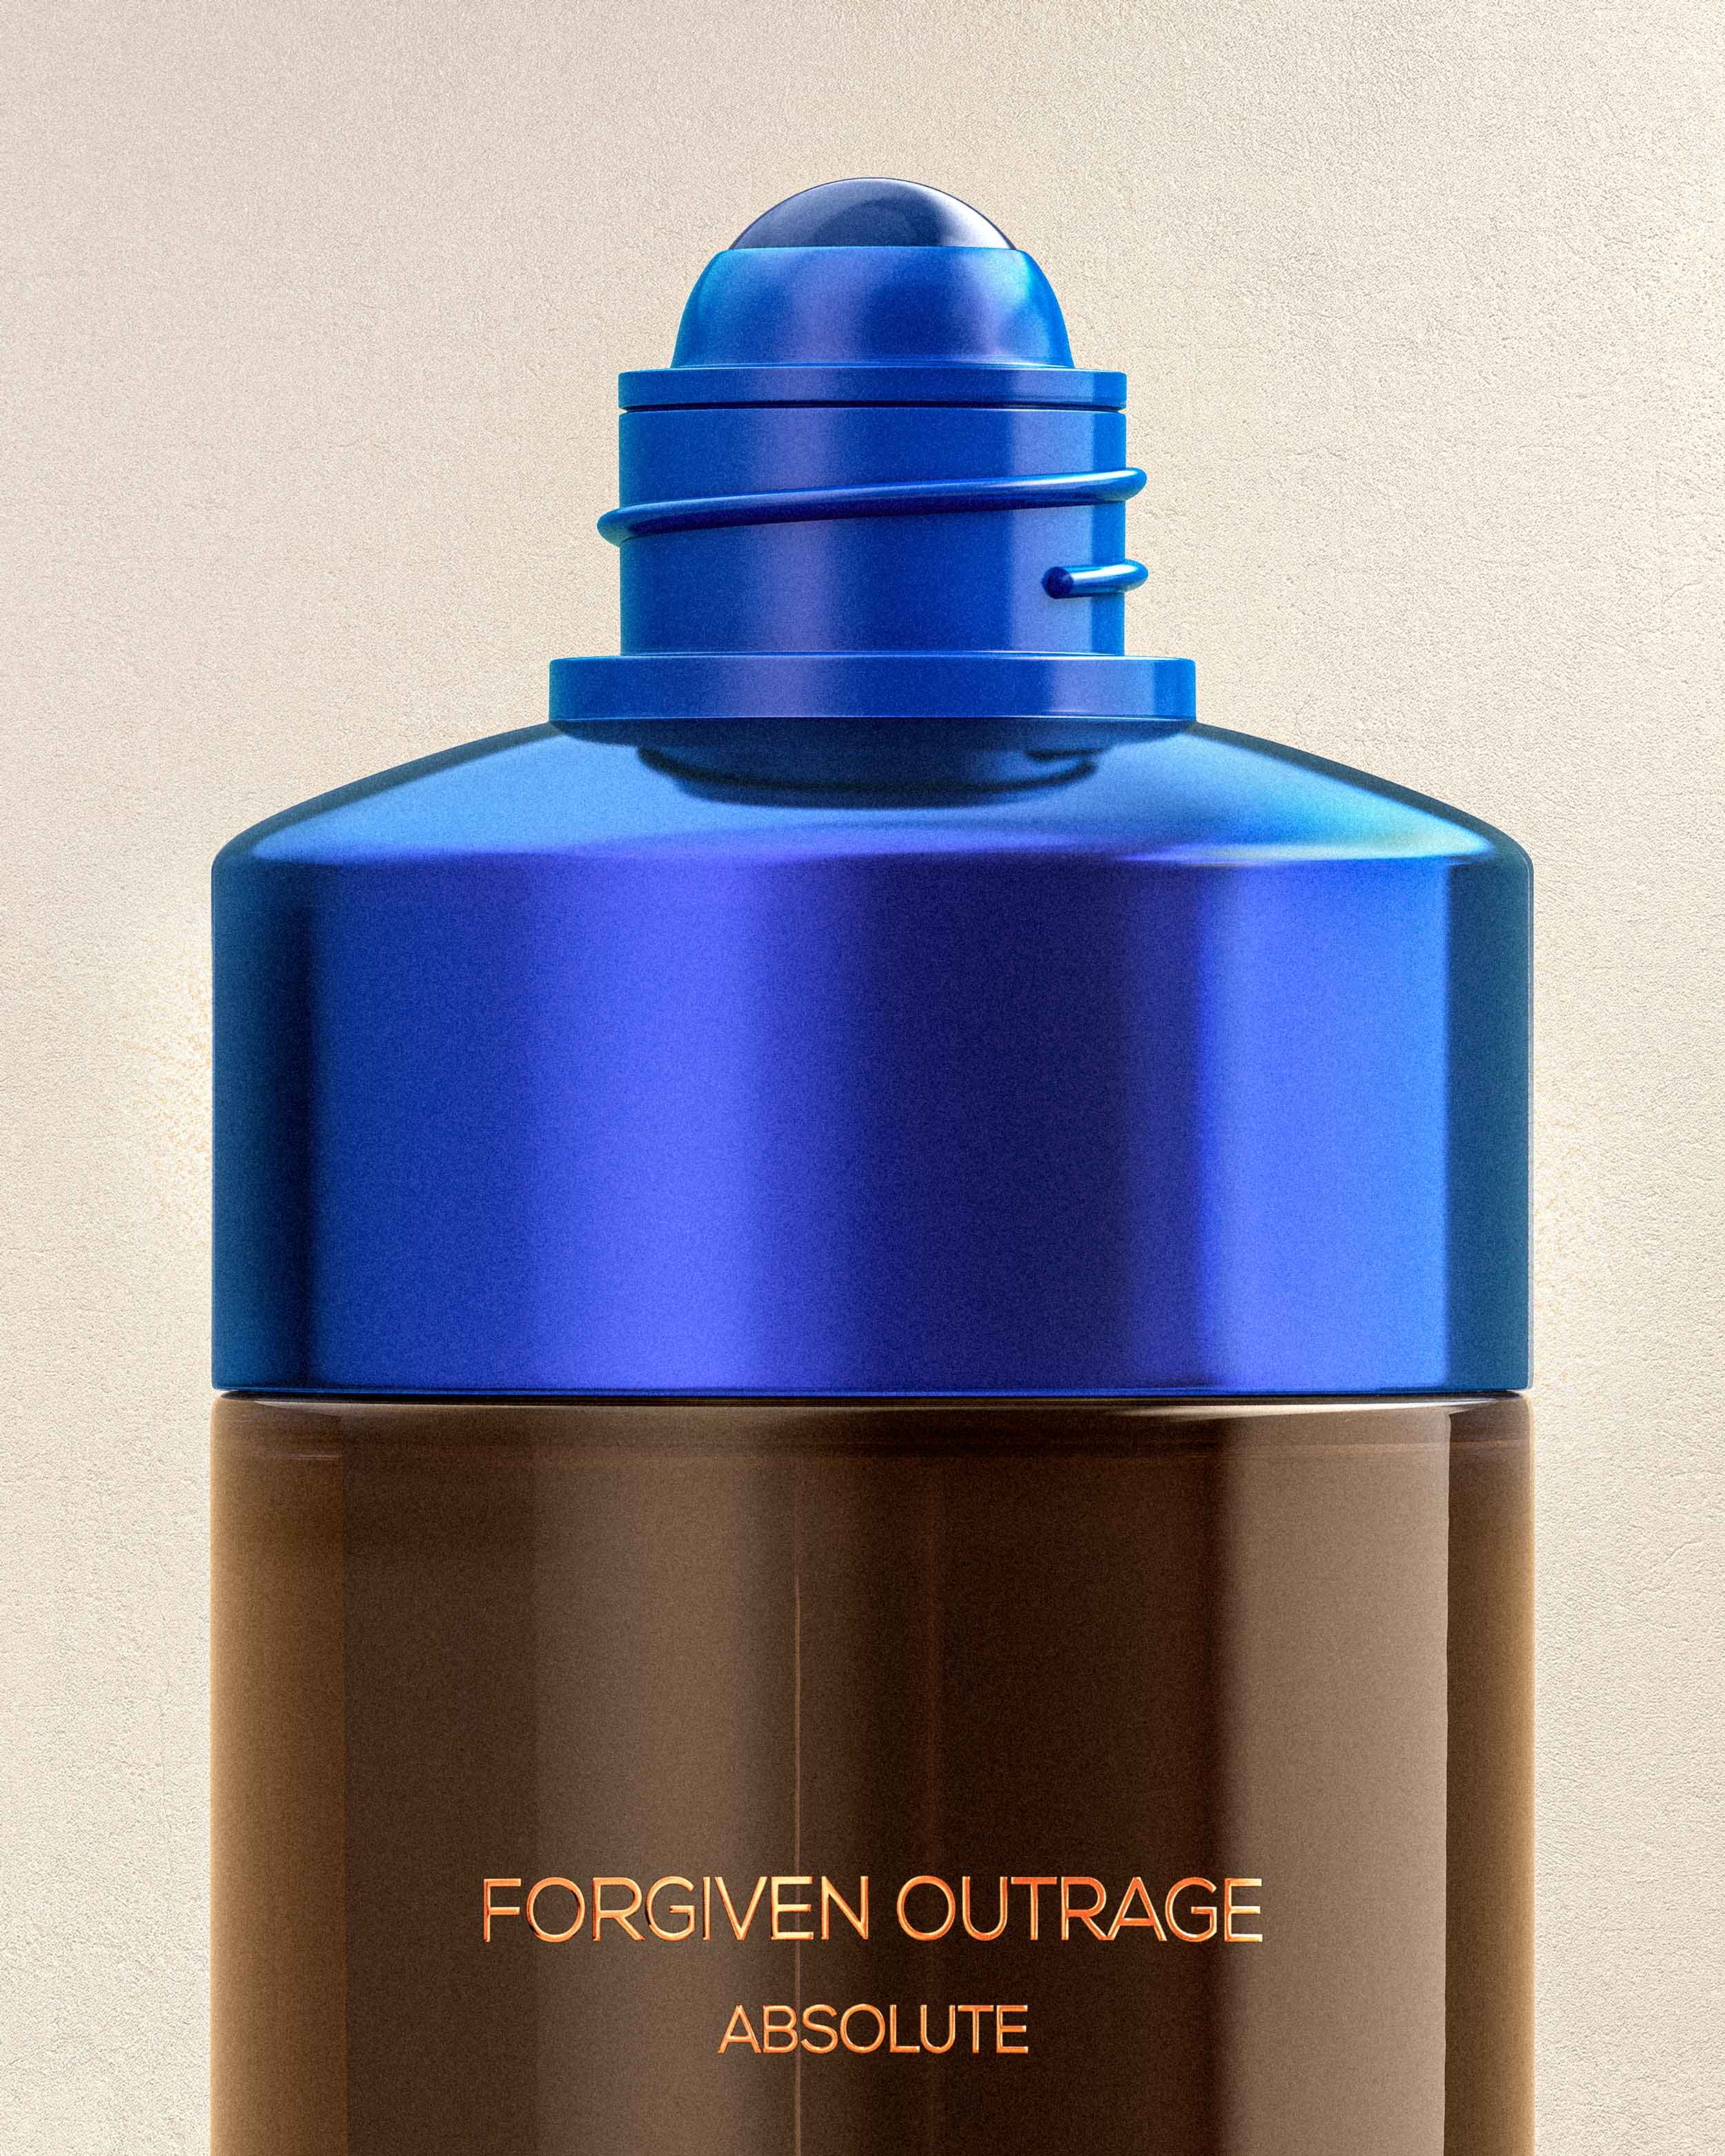 OJAR Absolute Forgiven Outrage Perfume Roll-on